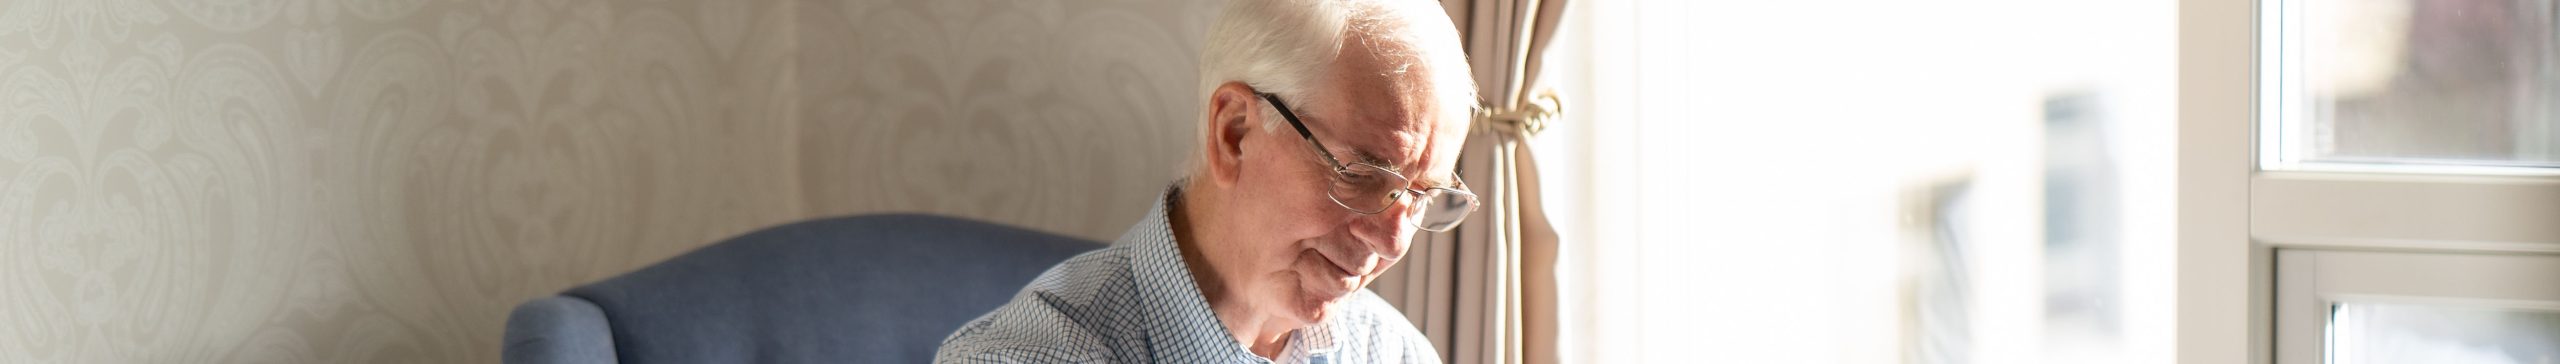 How can I best help my friend or loved one living with Dementia?